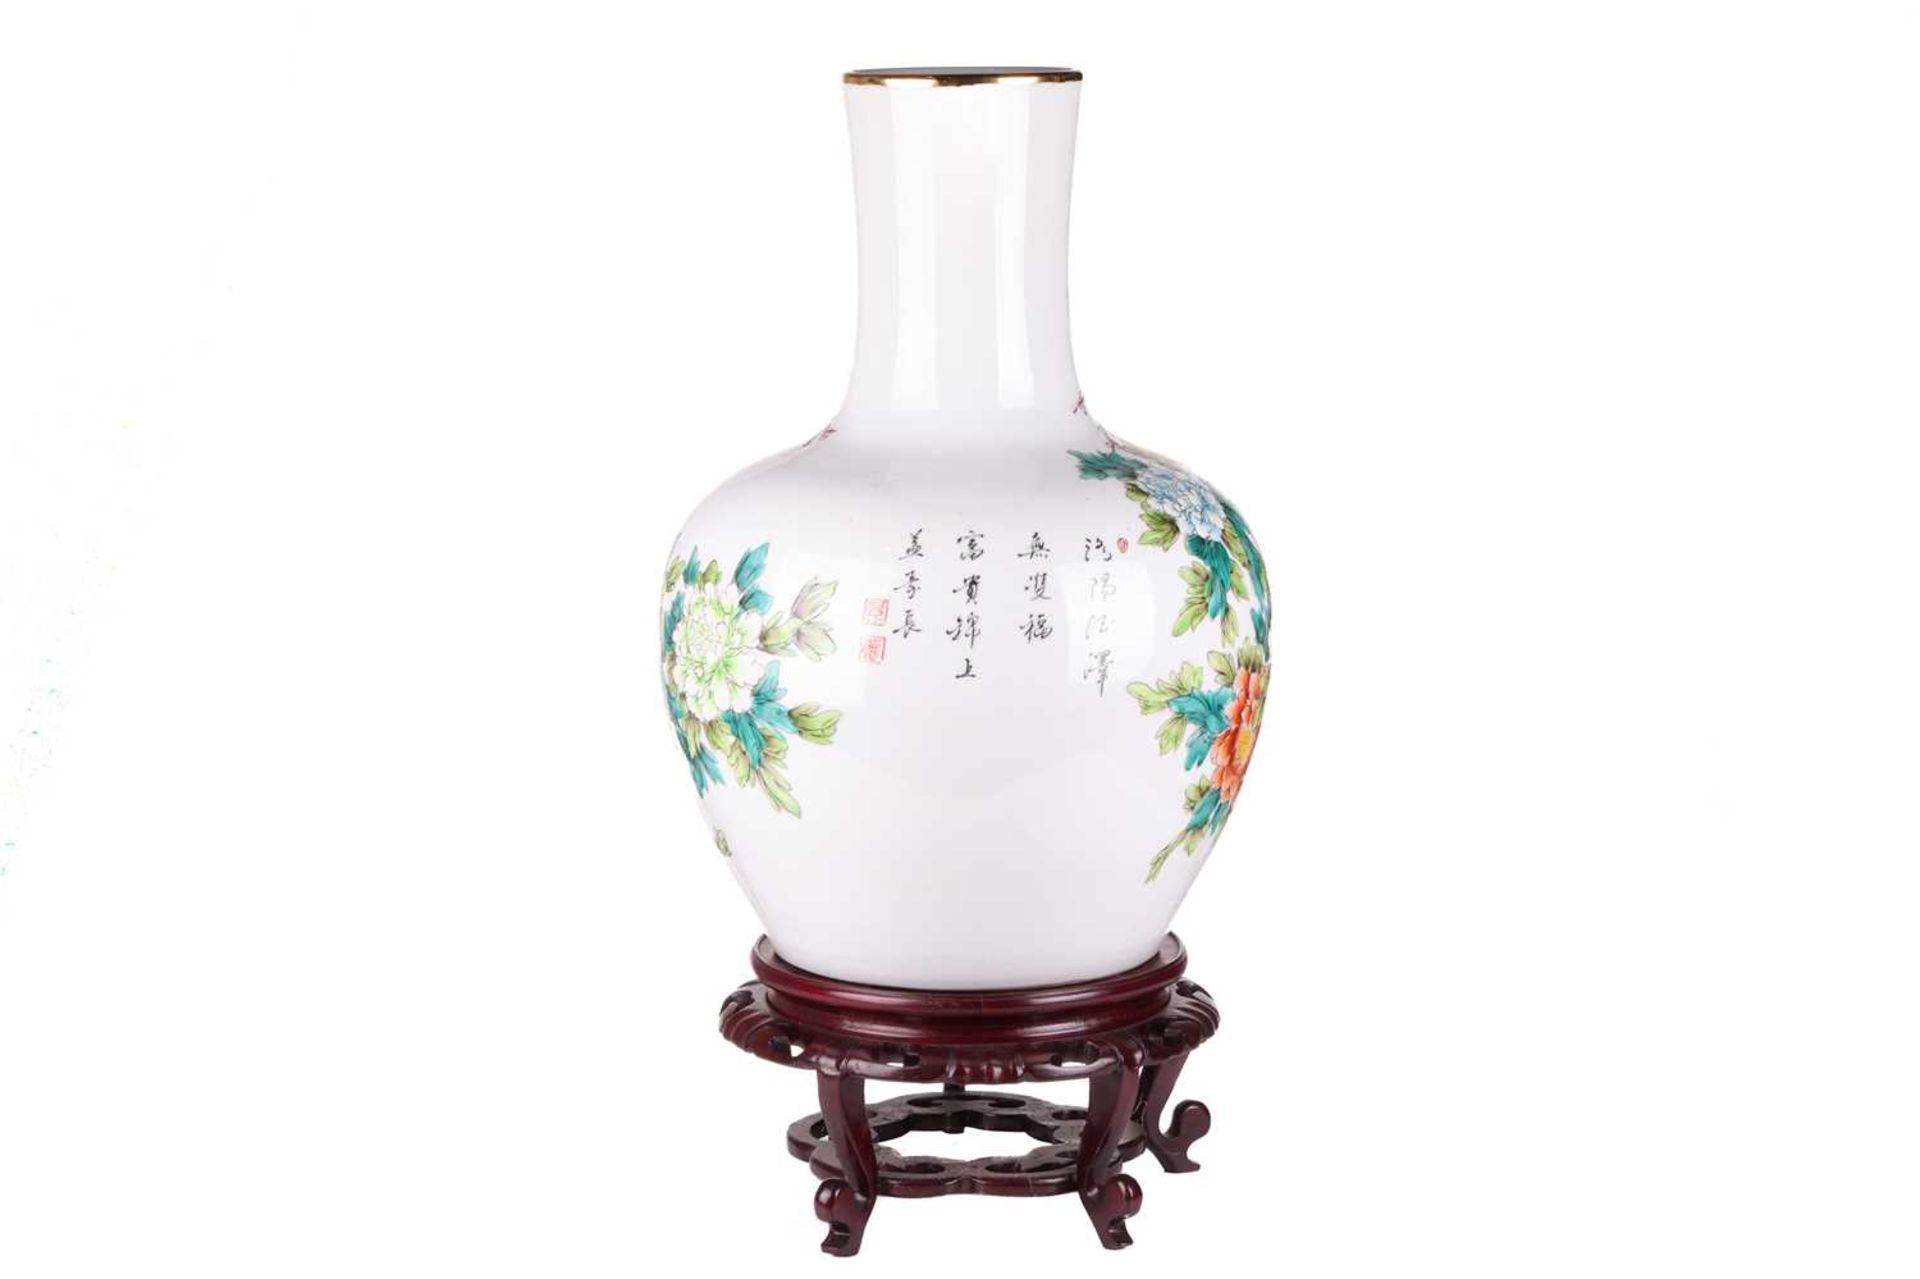 A large 18th-century style Chinese porcelain famille rose heavy baluster vase, 20th-century, with pe - Image 4 of 5